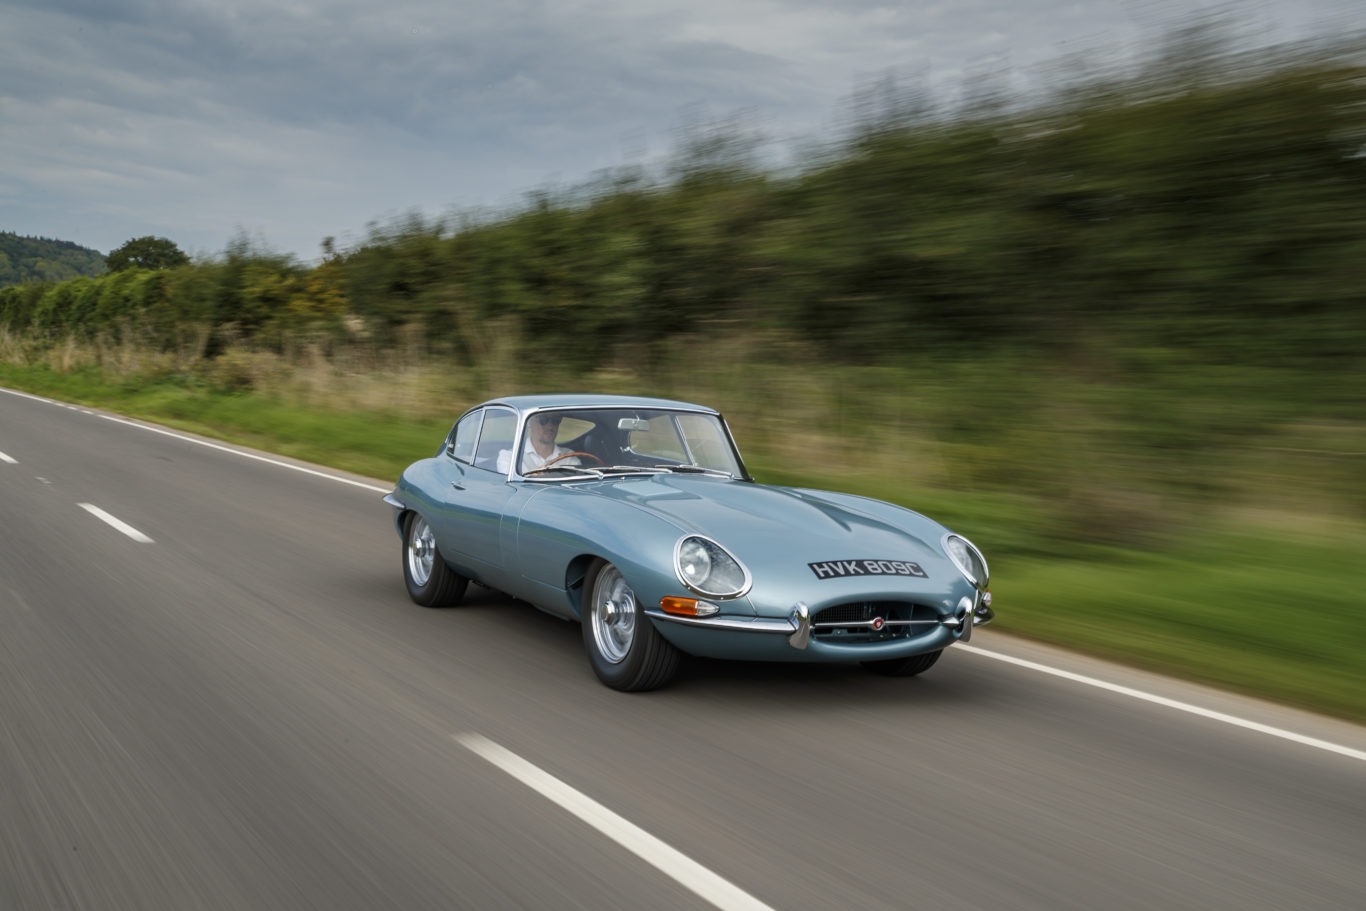 The E-Type has been painstakingly re-built